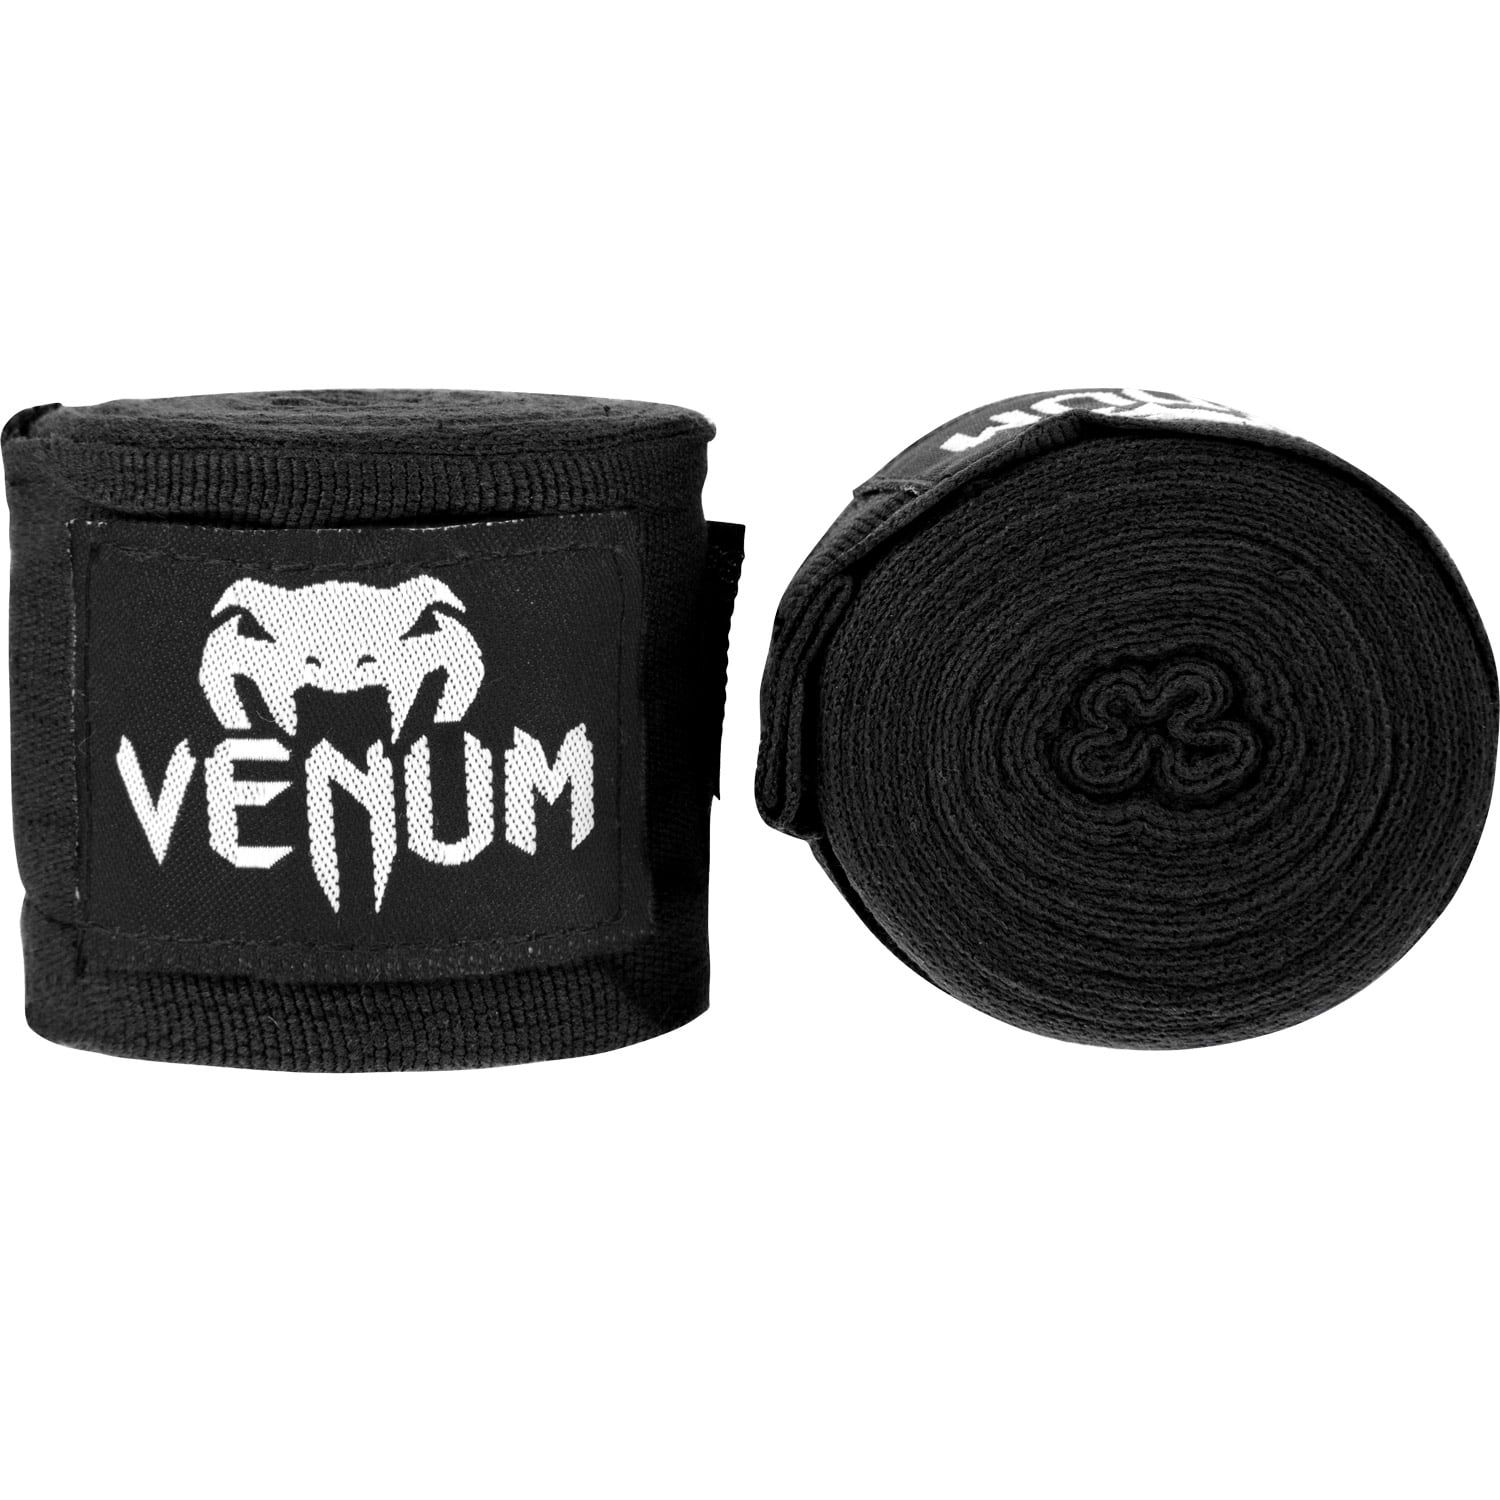 Venum Contact Boxing Exercise Wrap - 180 In. Black and White